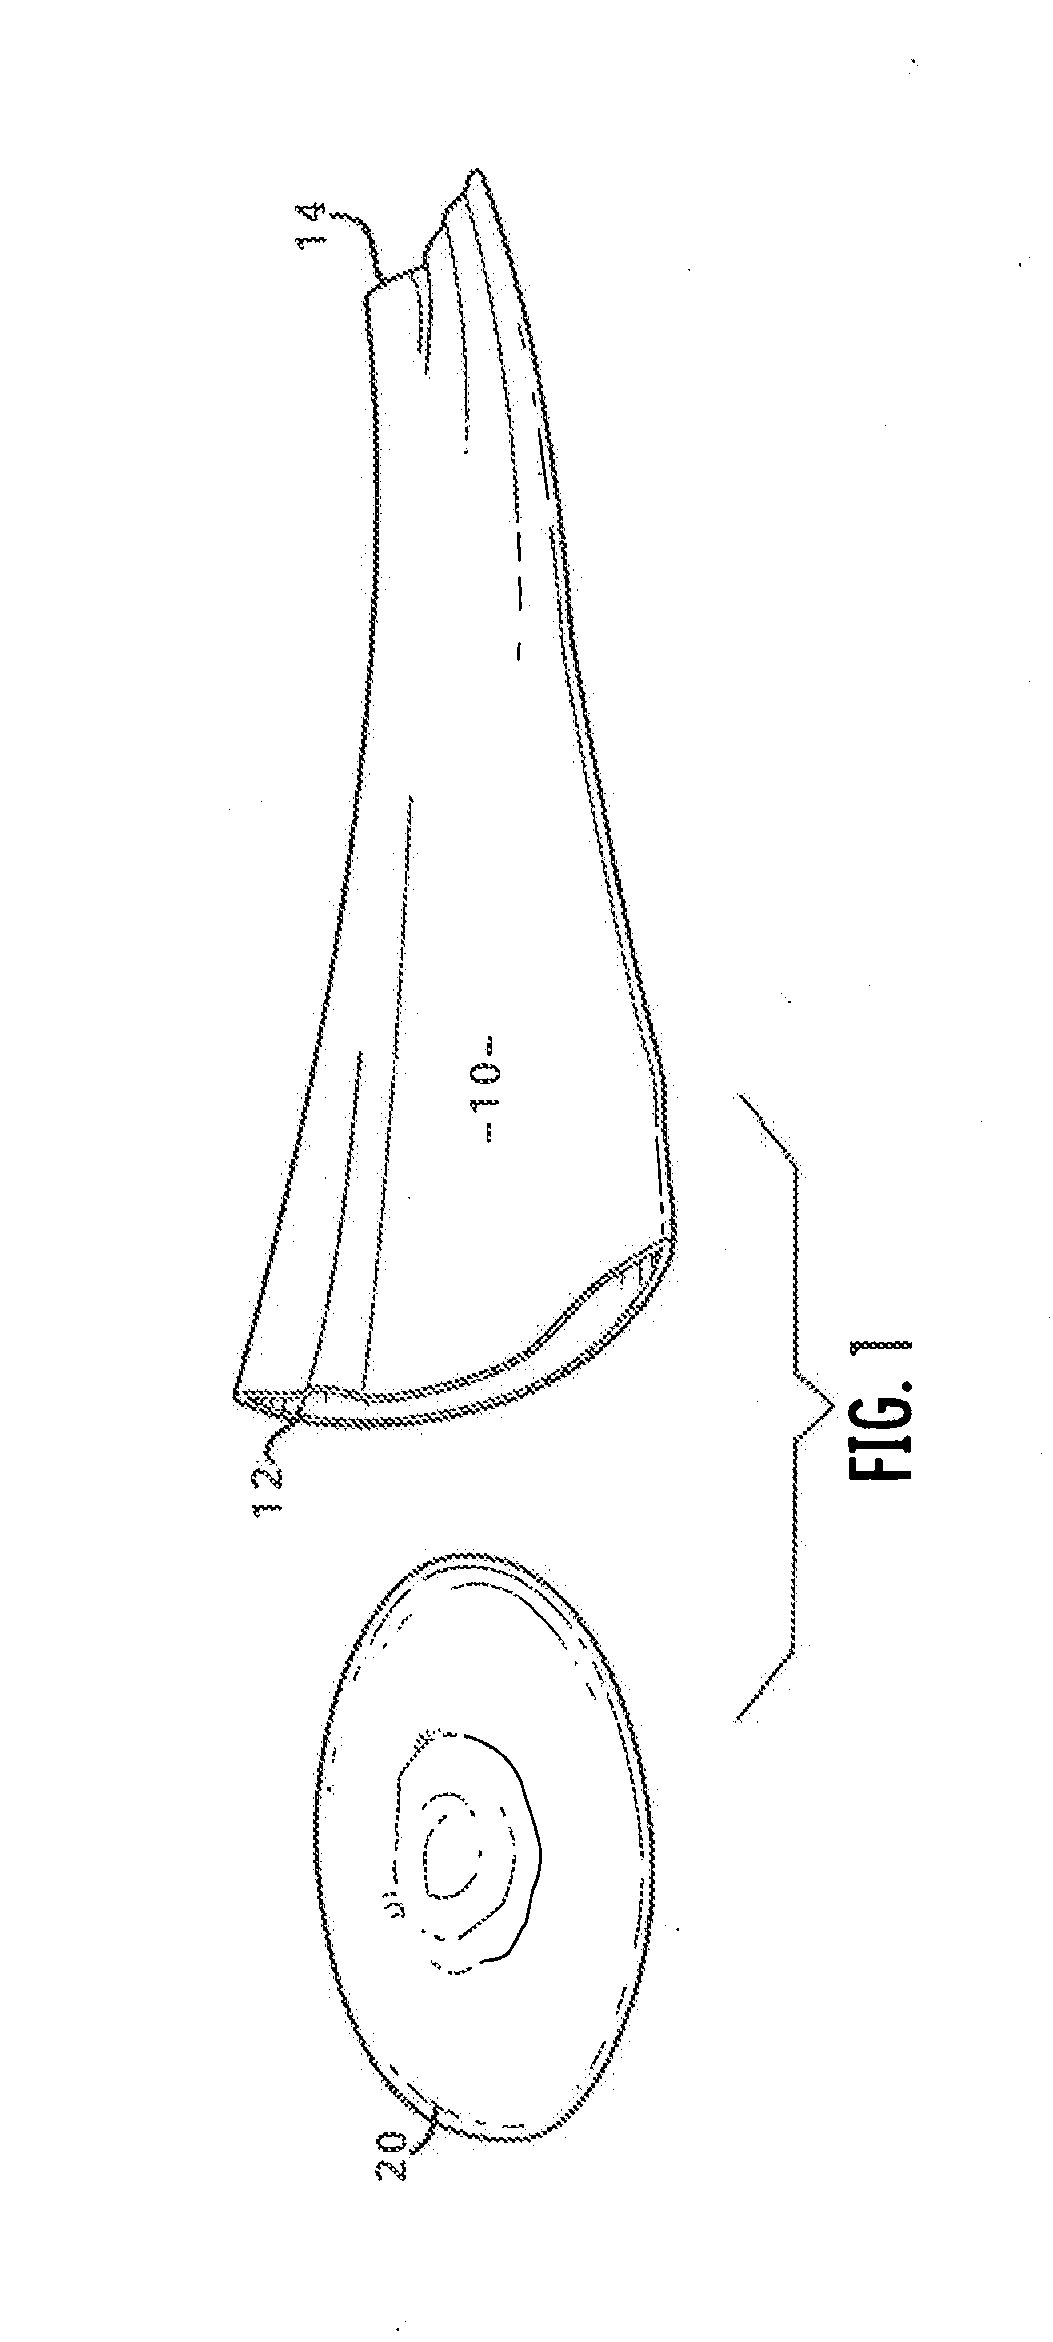 Apparatus and Process for Delivering a Silicone Prosthesis into a Surgical Pocket